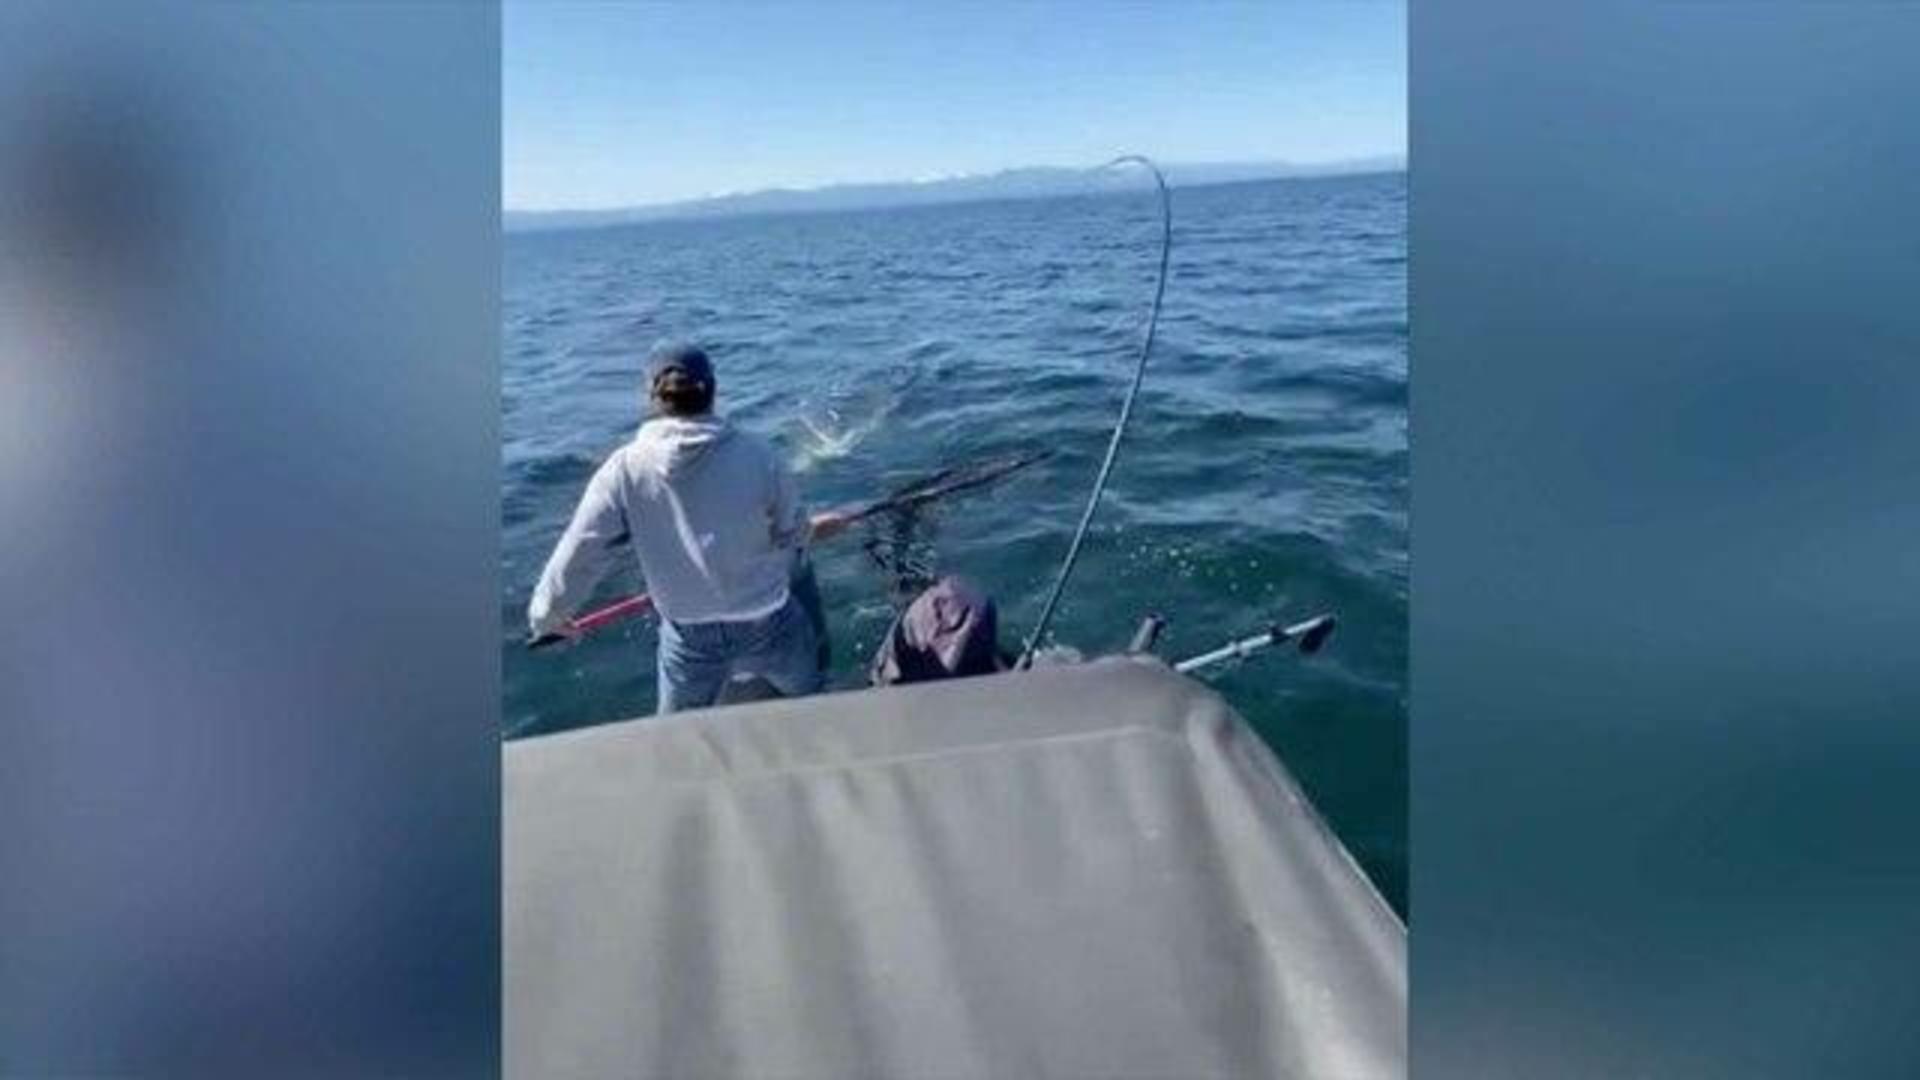 Sea lion steals catch from fisherman - CBS News